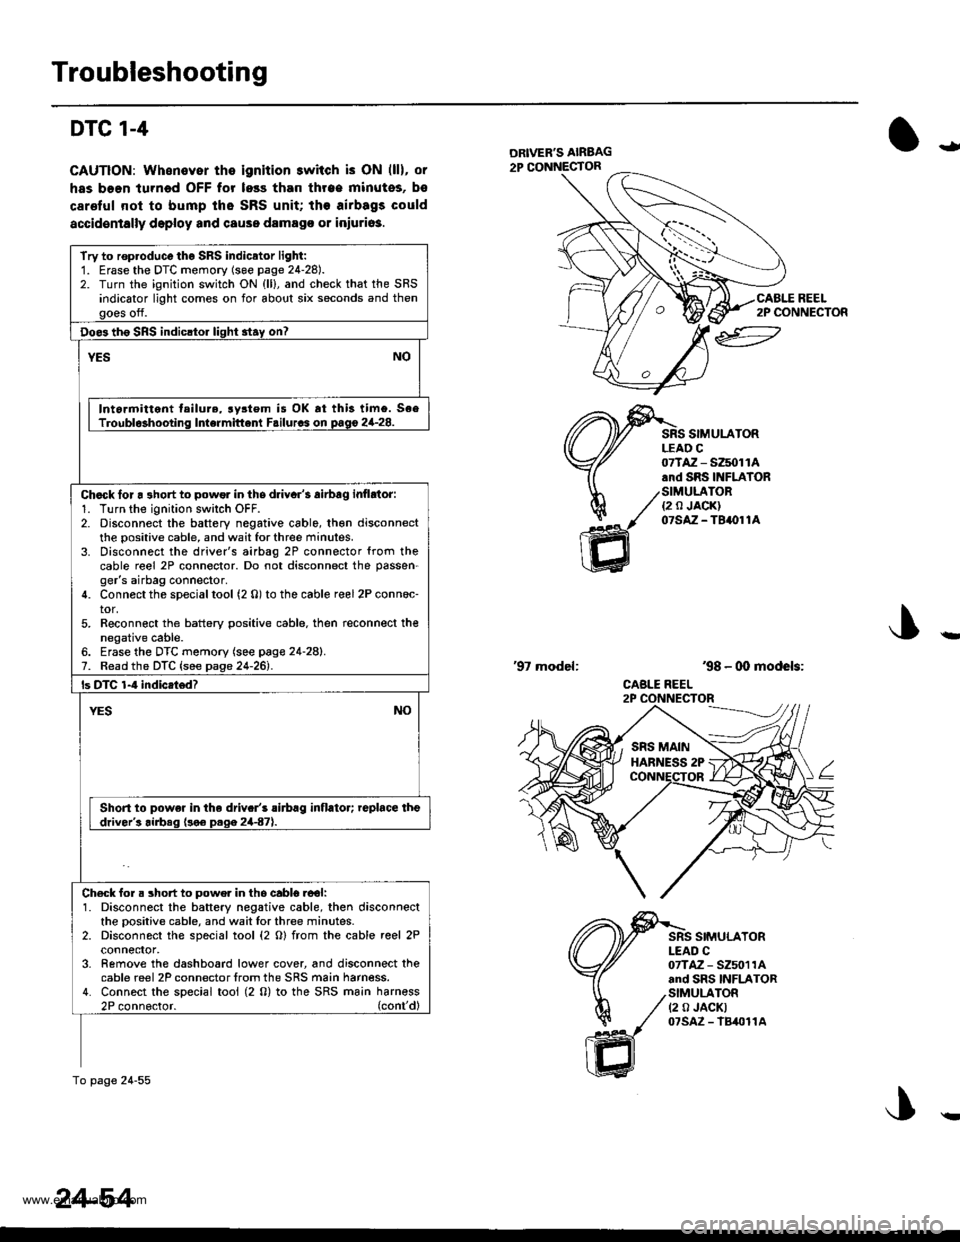 HONDA CR-V 1997 RD1-RD3 / 1.G Owners Manual 
Troubleshooting
DTC 1-4
CAUTION: Whonover the ignition switch is ON (ll), or
has boen turned OFF for less than throe minutos, bs
carelul nol to bump tho SRS unit; the airbags could
accidentally deplo